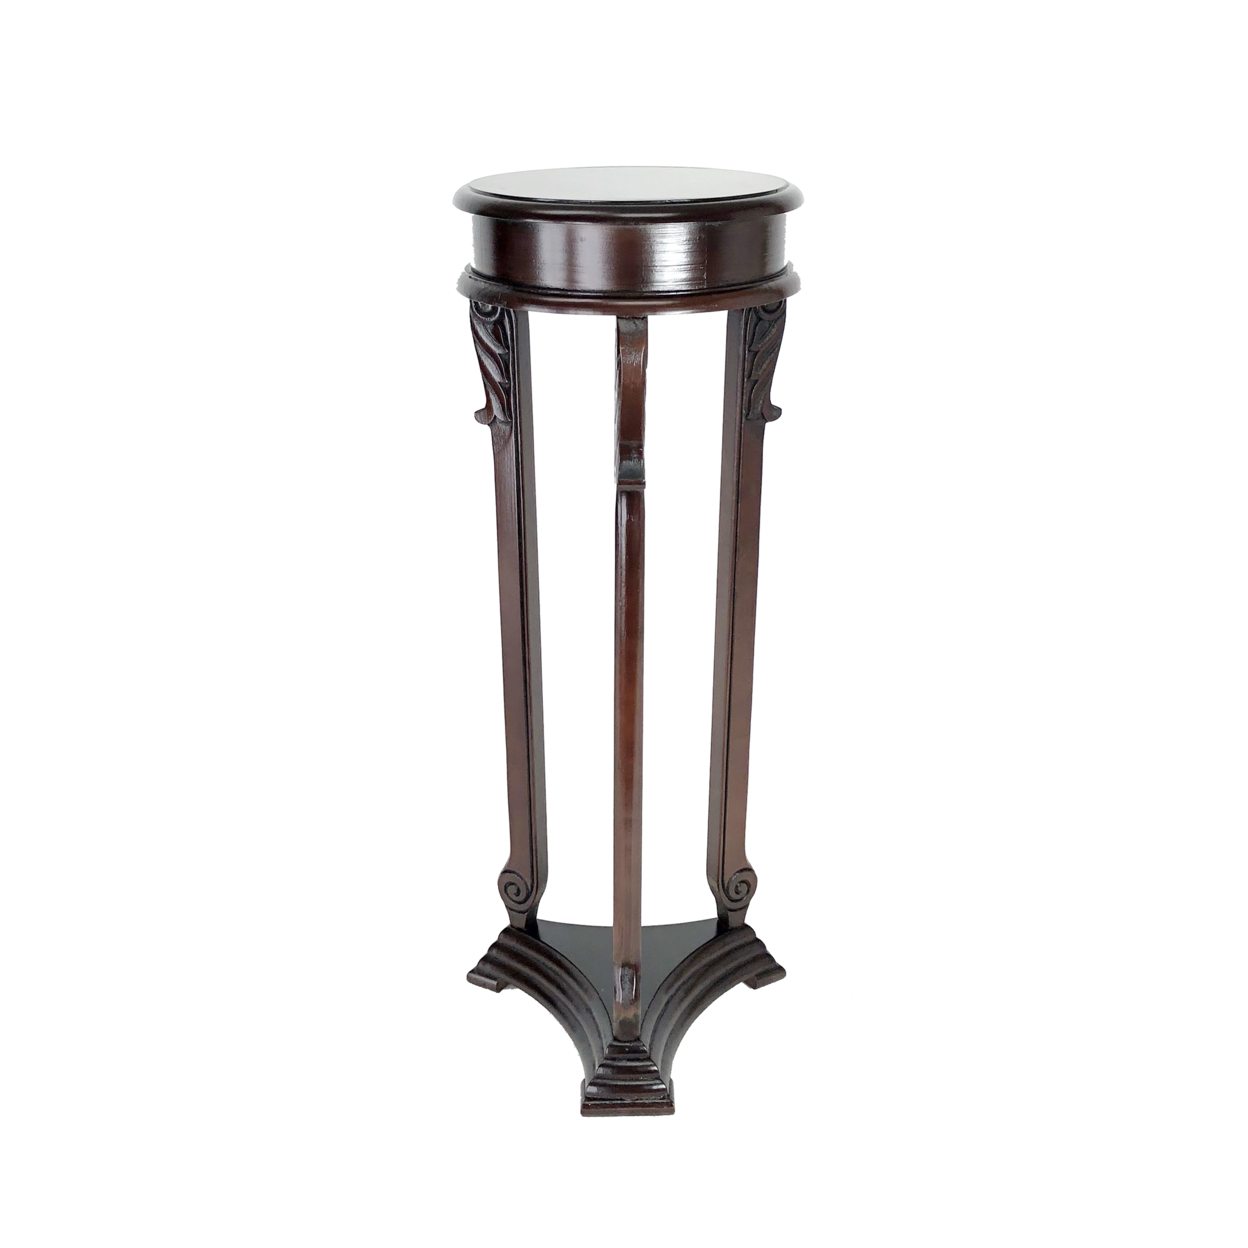 Transitional Style Wooden Pedestal With Scrolled Legs, Brown- Saltoro Sherpi